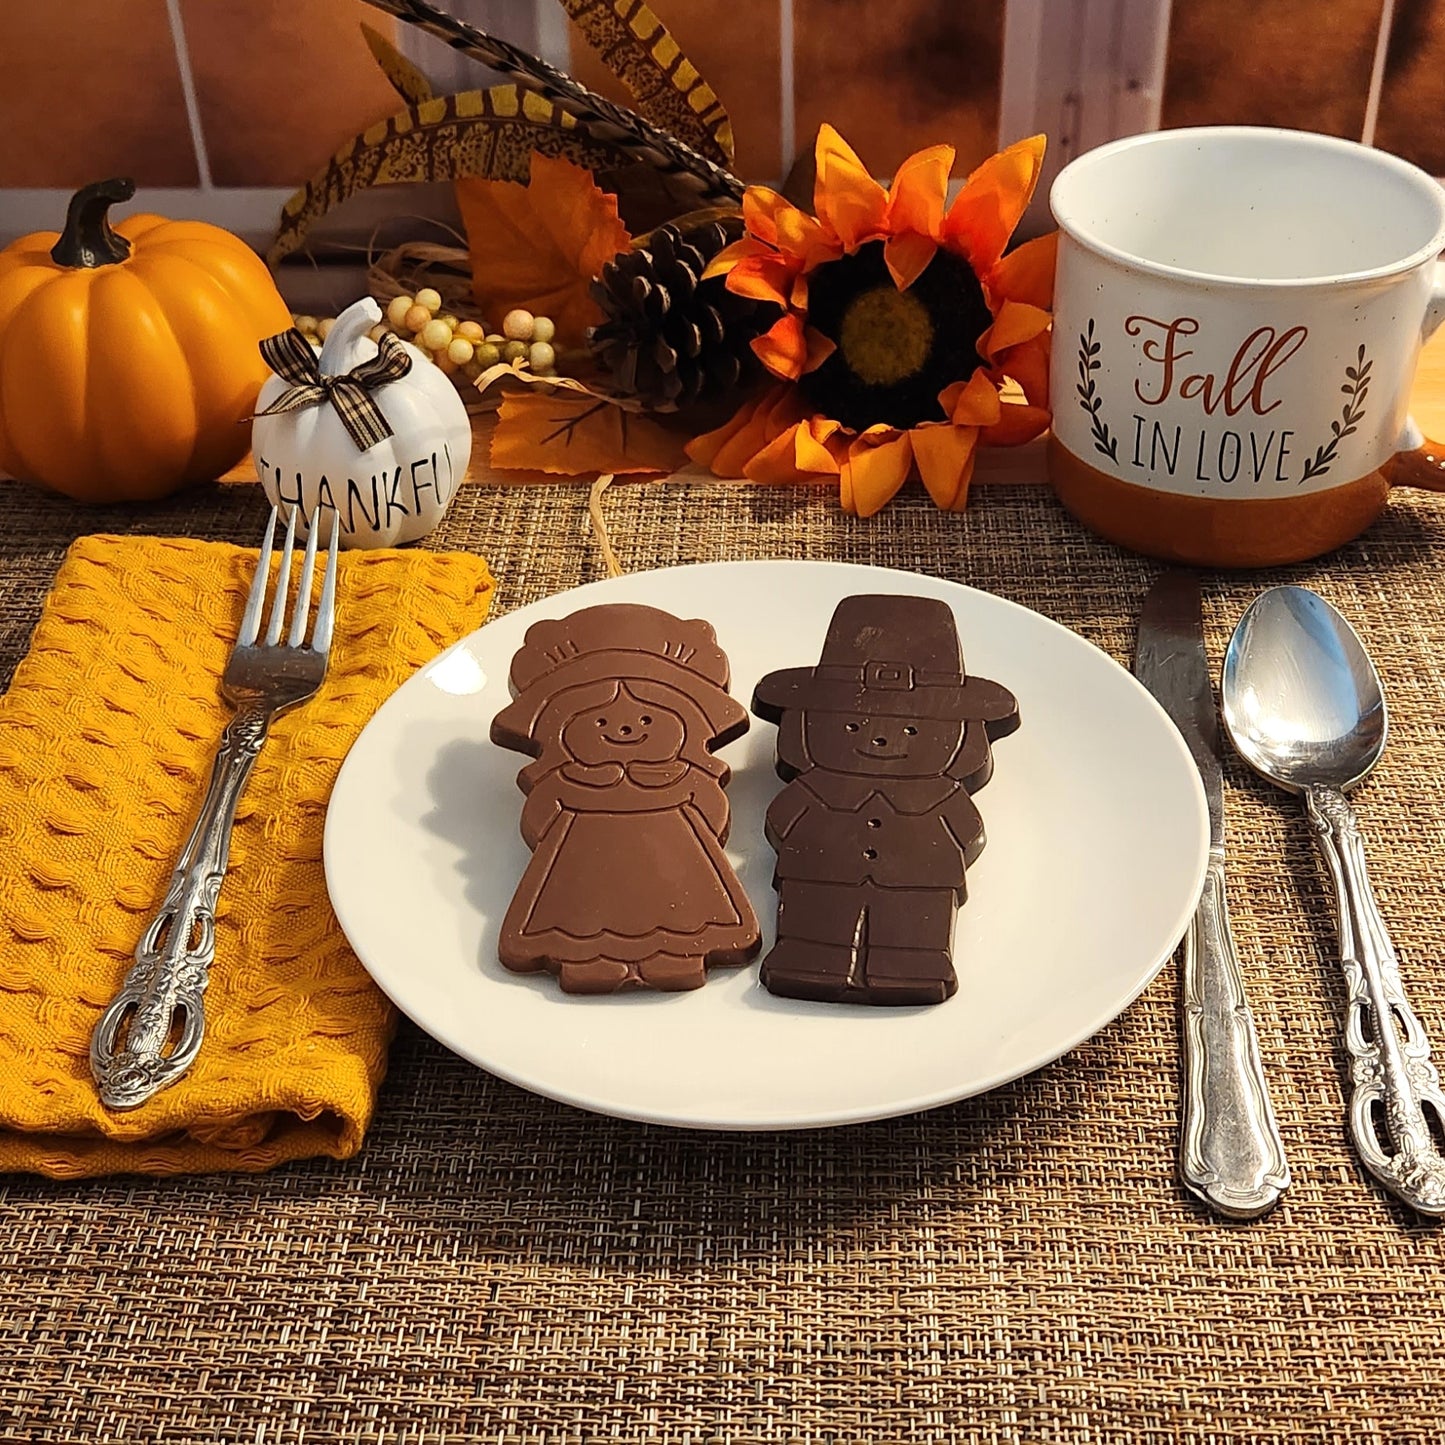 Enjoy these charming milk and dark chocolate treats shaped as boy and girl pilgrims.